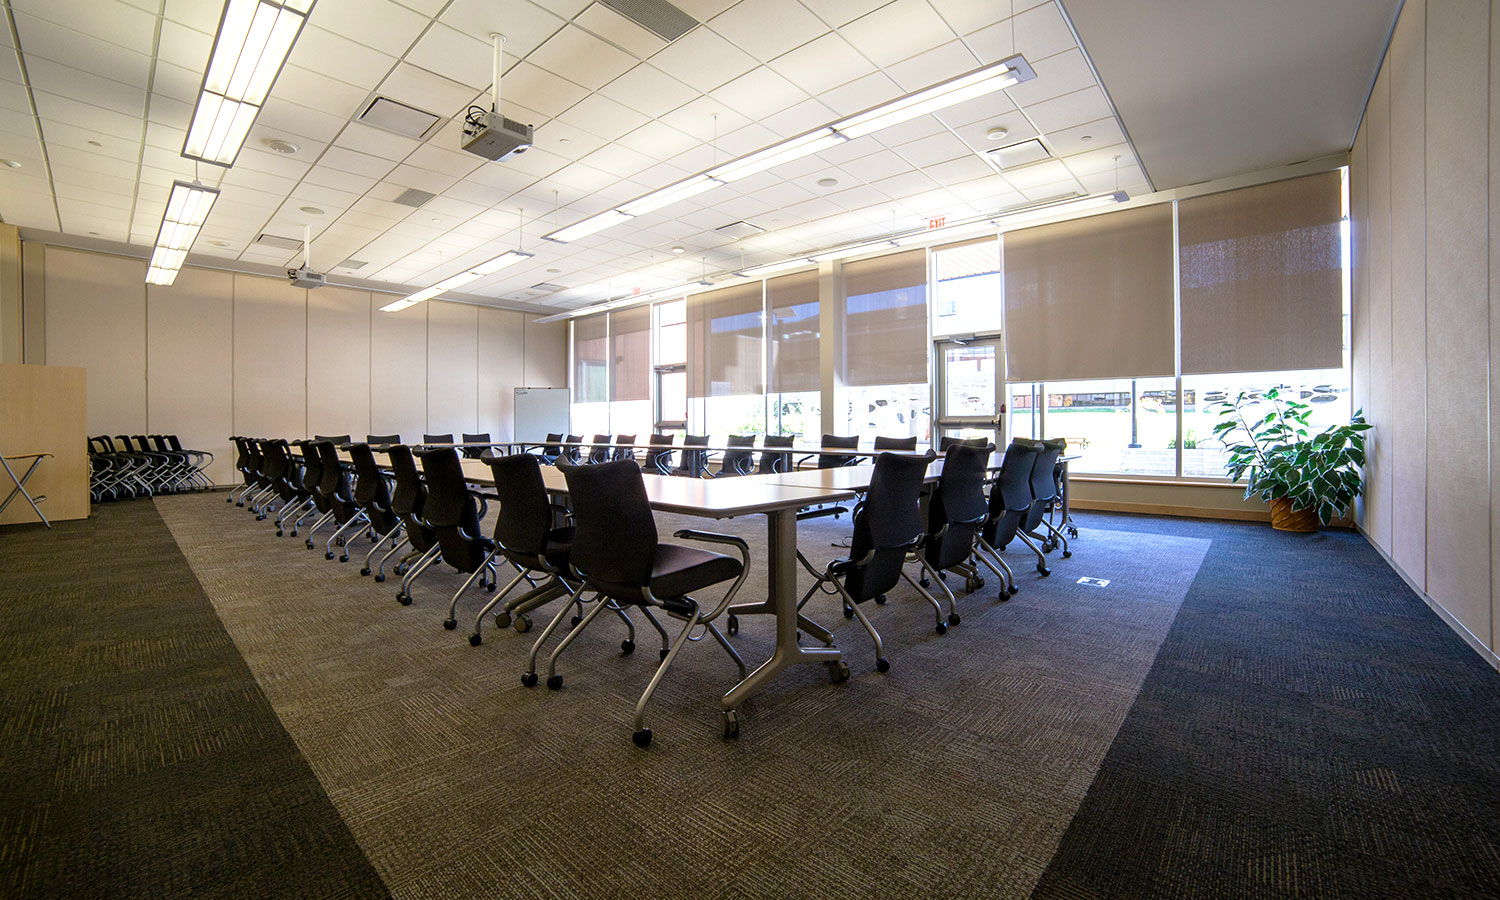 Large meeting rooms